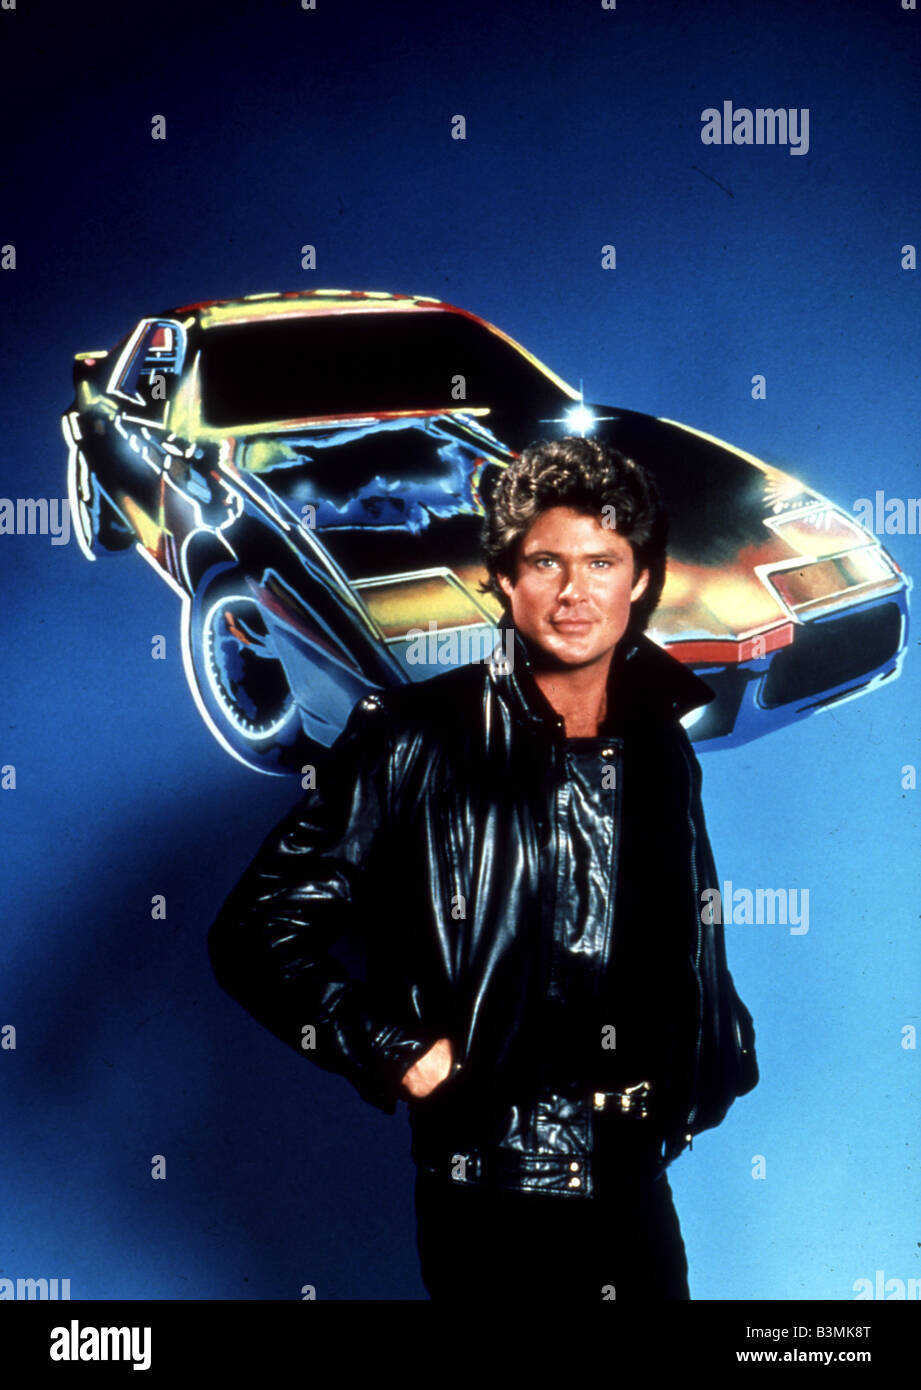 Knight Rider' First Revved Its Engine in 1982 With David